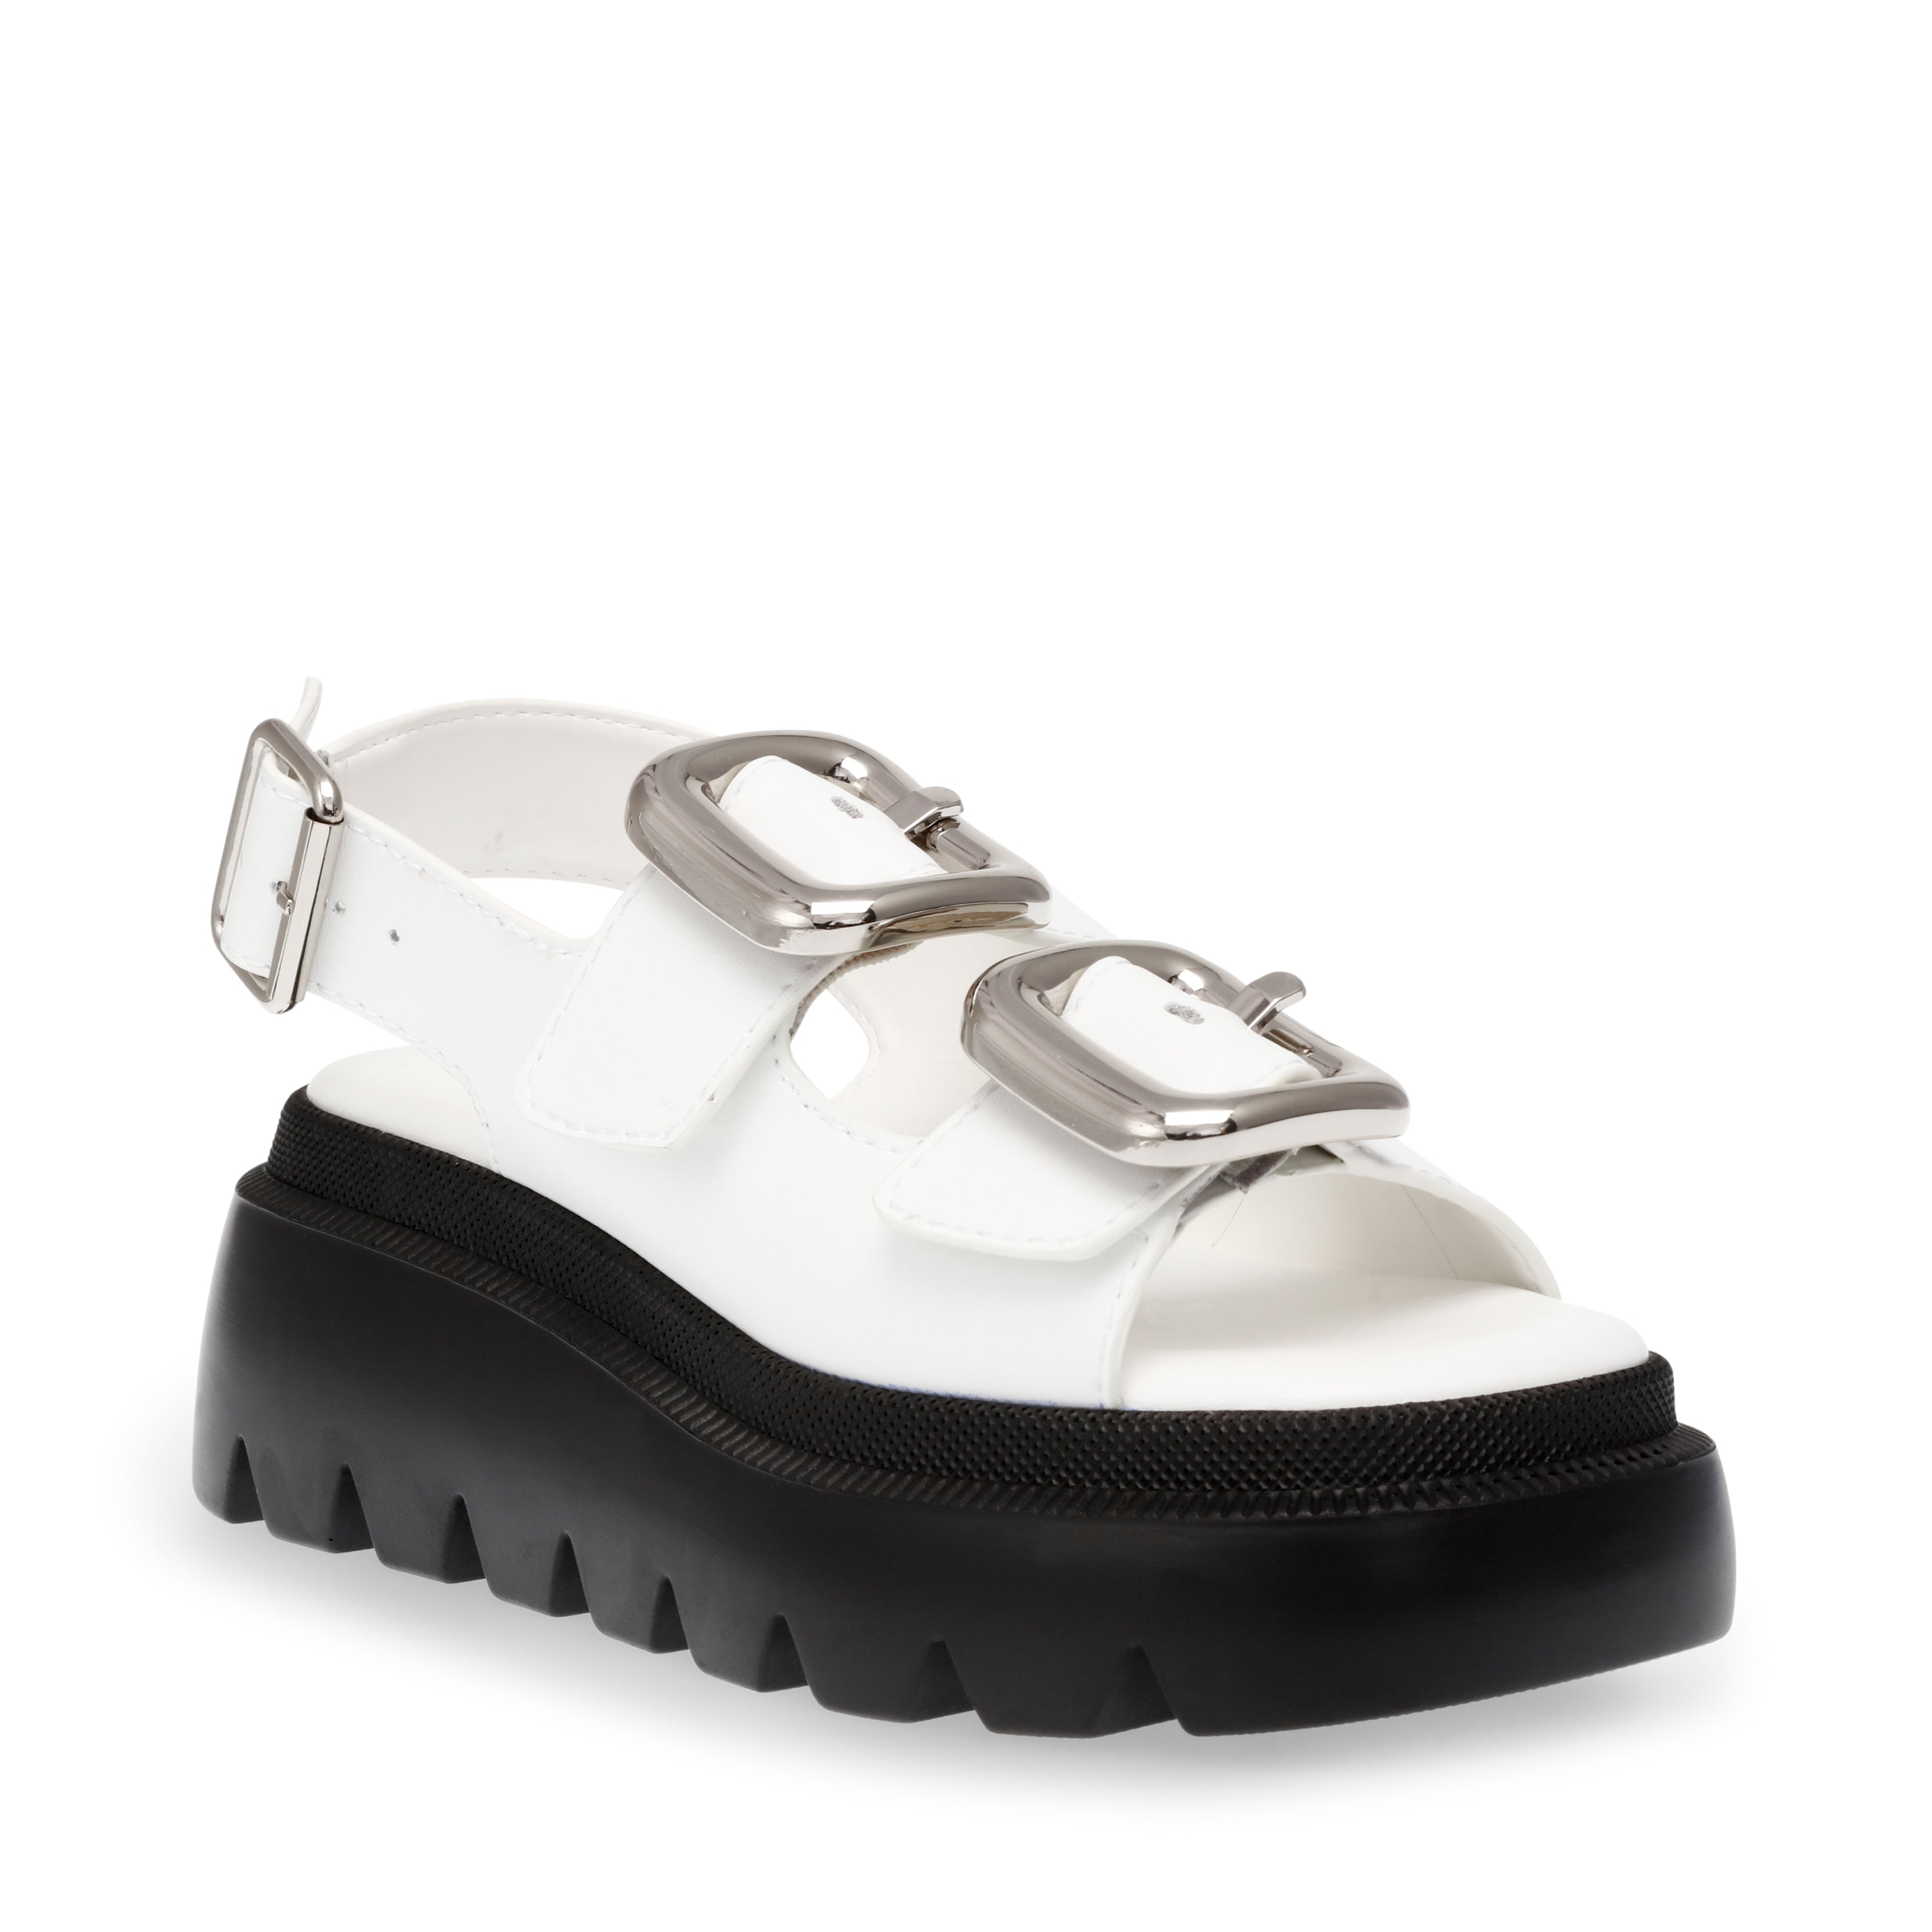 TRANSPORTER WHITE ACTION LEATHER SANDALS- Hover Image